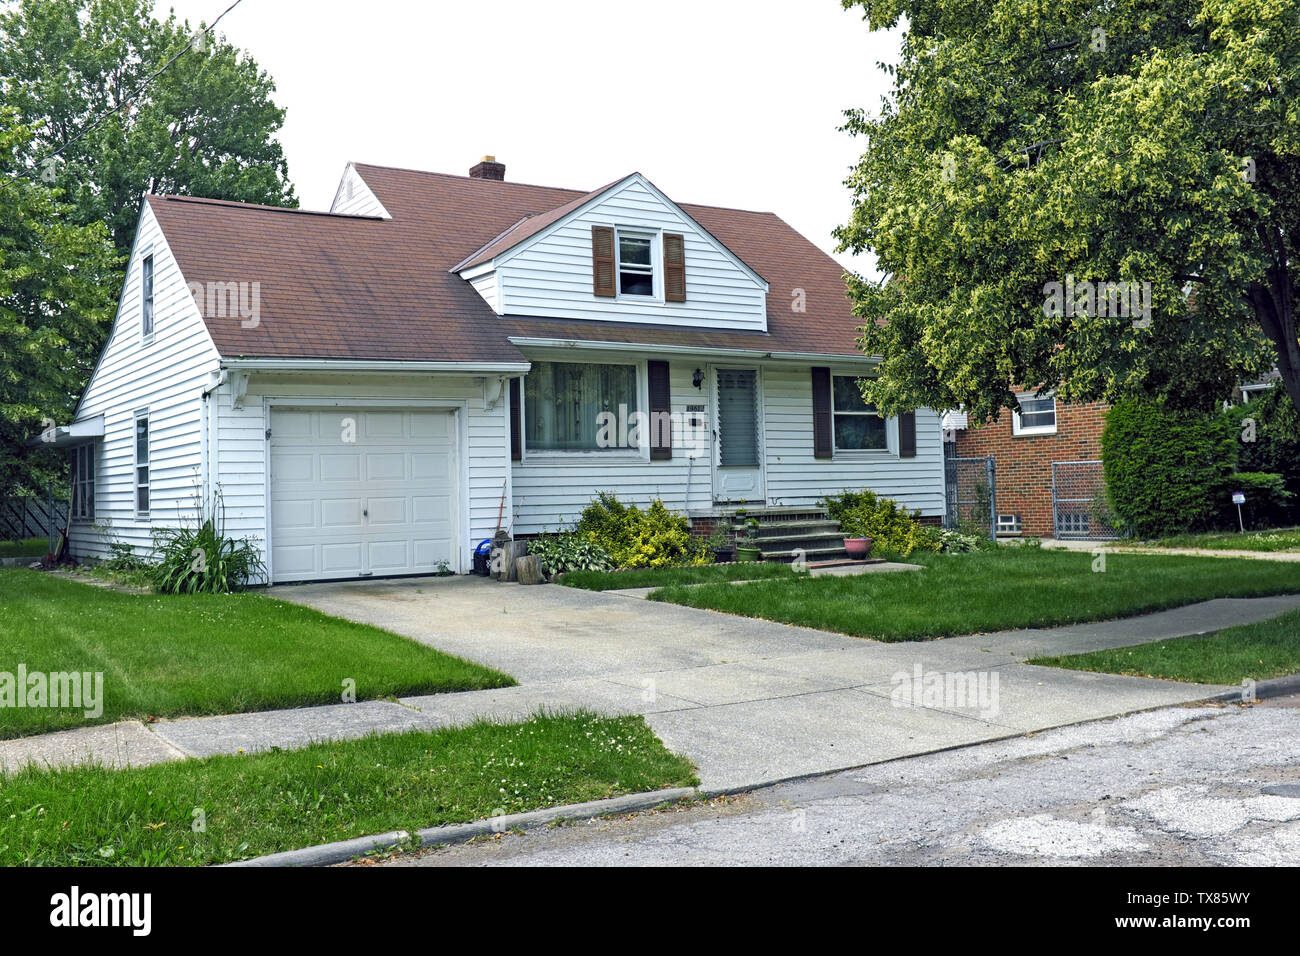 Diane Madison, mother of convicted serial killer Michael Madison, was slain in this Cleveland Ohio home on June 22, 2019.  The mother and three children, two 10-year olds and a 12-year old, were stabbed by an intruder with two of the children eventually escaping to get help.  The three children sustained injuries but were not slain. The suspected killer, Jaylen Latrell Plummer, was found in the shower in the house and is in custoday.  The home is also where Michael Madison barricaded himself inside in 2013 prior to his arrest for the serial murders. Stock Photo